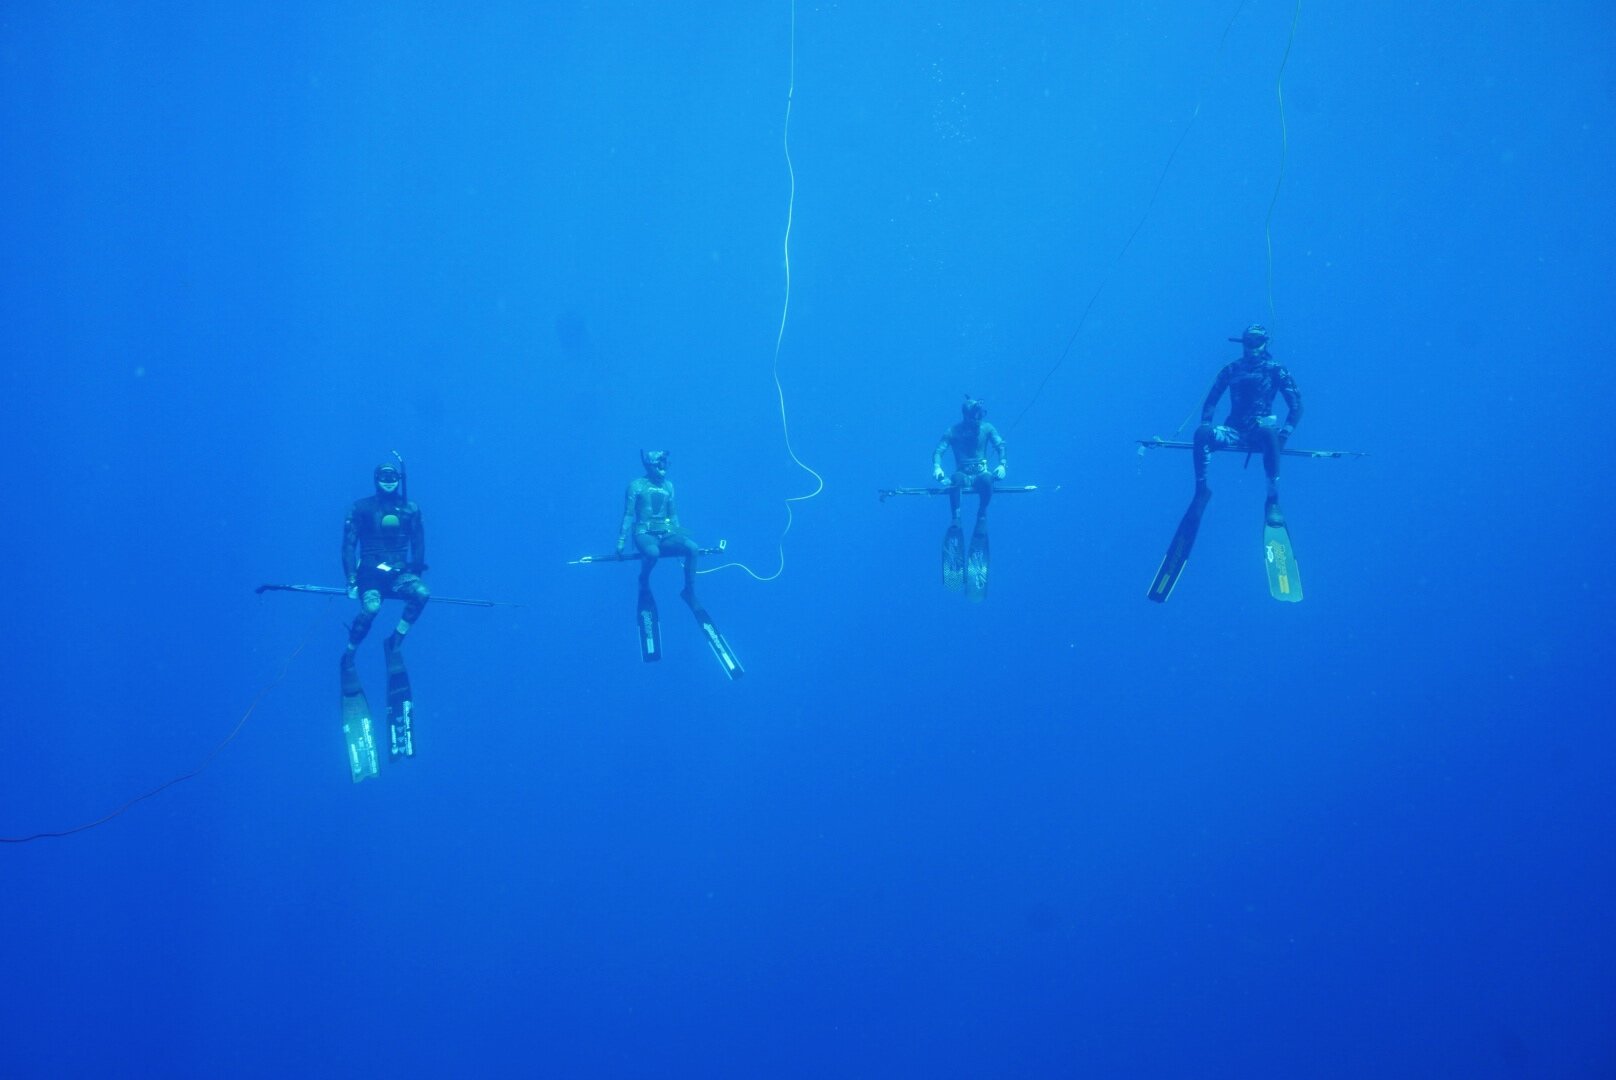 How to set up your gear for bluewater spearfishing